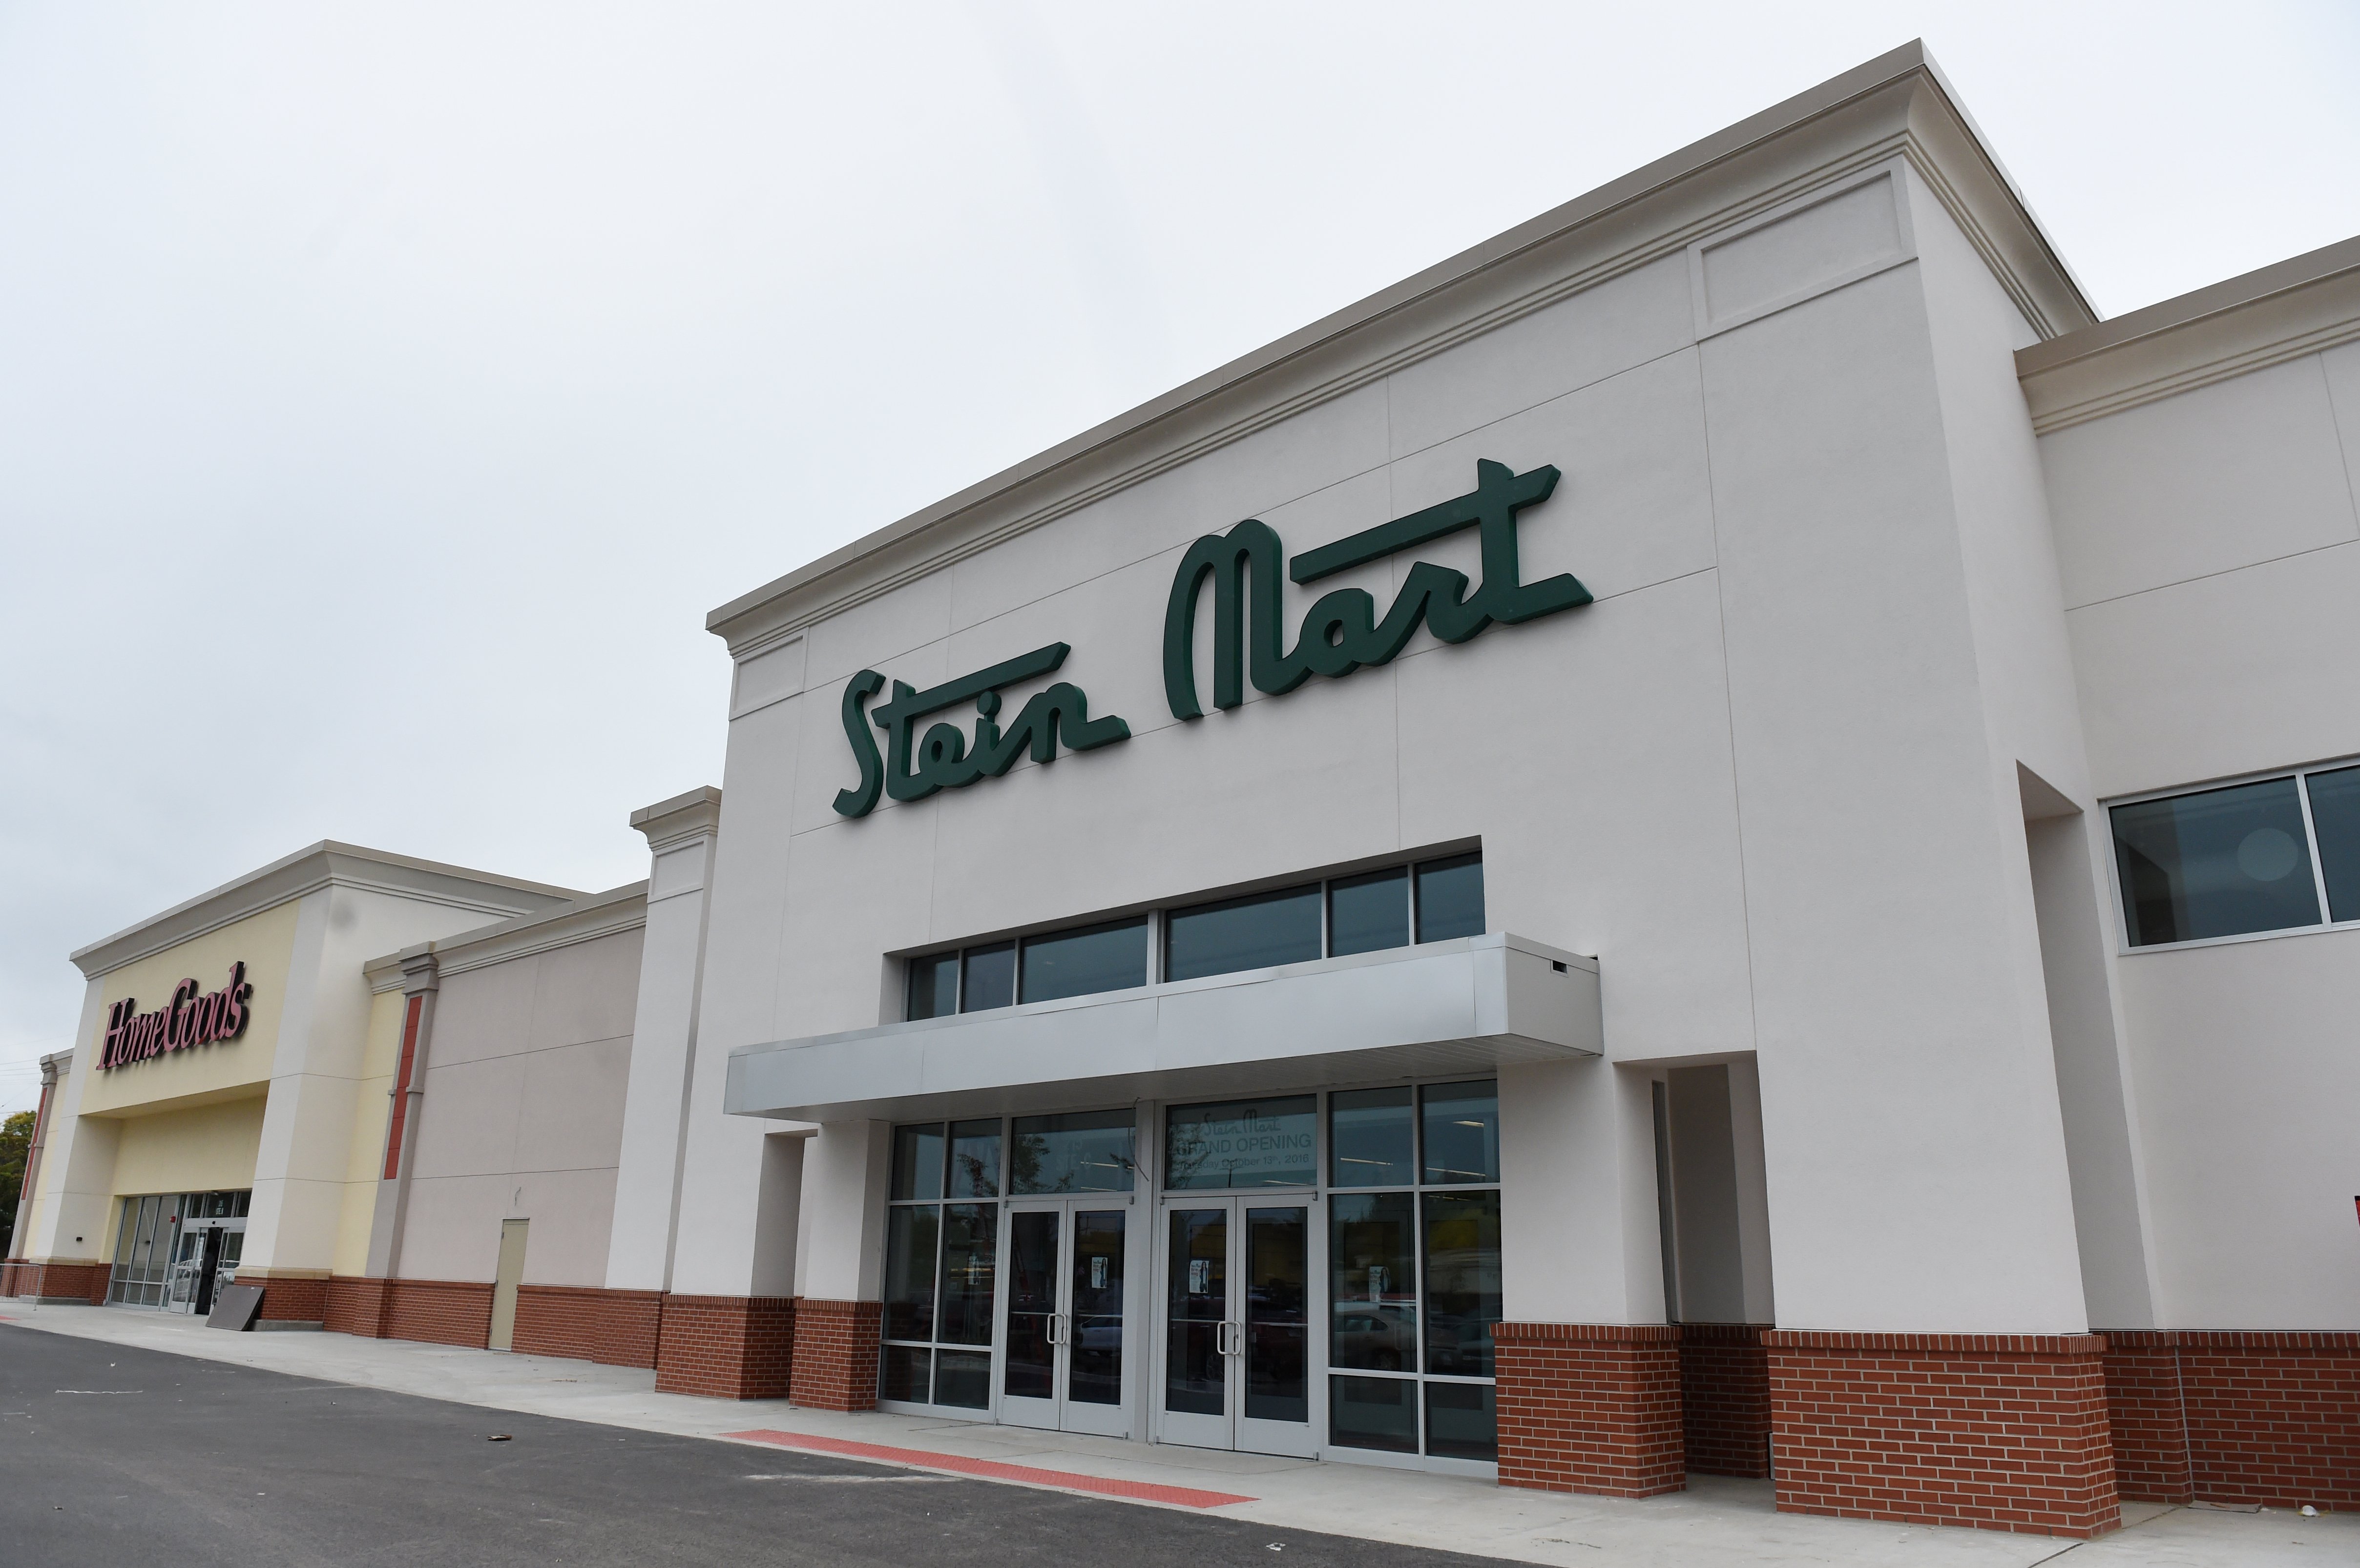 Hanover Center losing another large tenant as Stein Mart closes